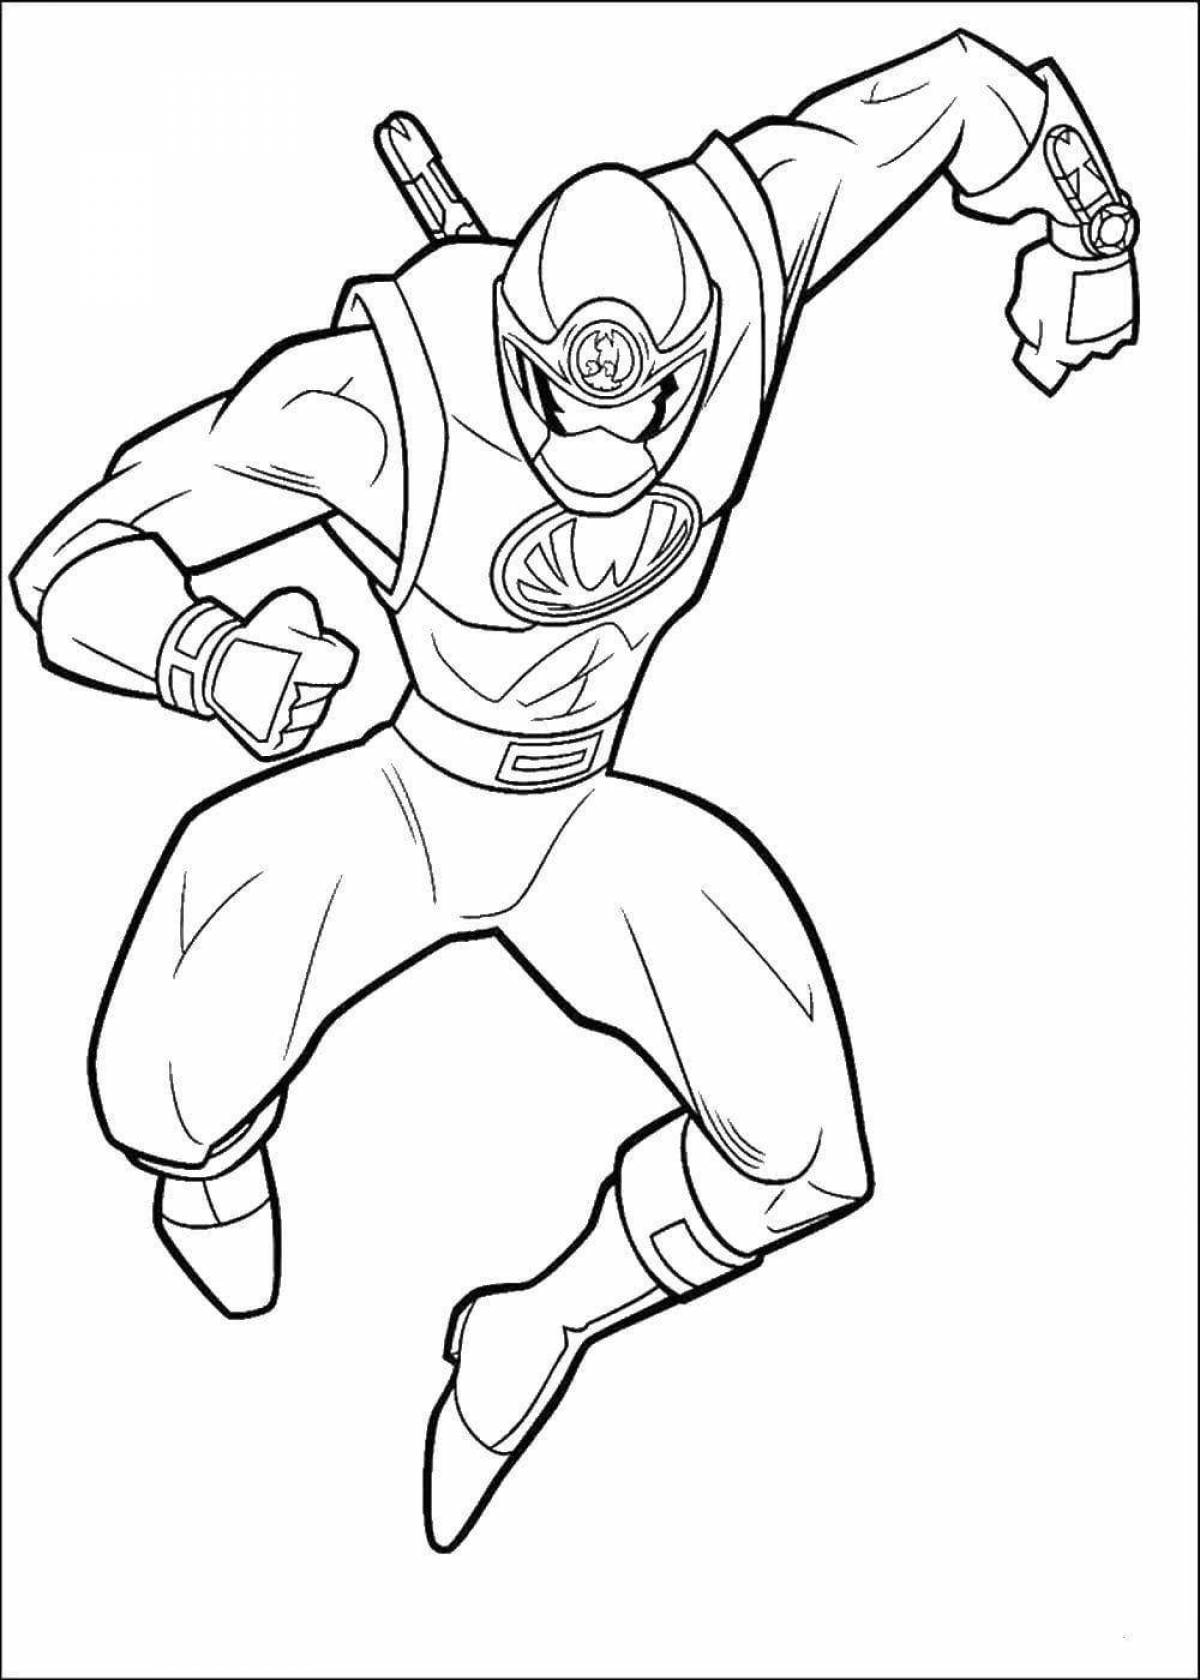 Dynamic Power Rangers coloring page